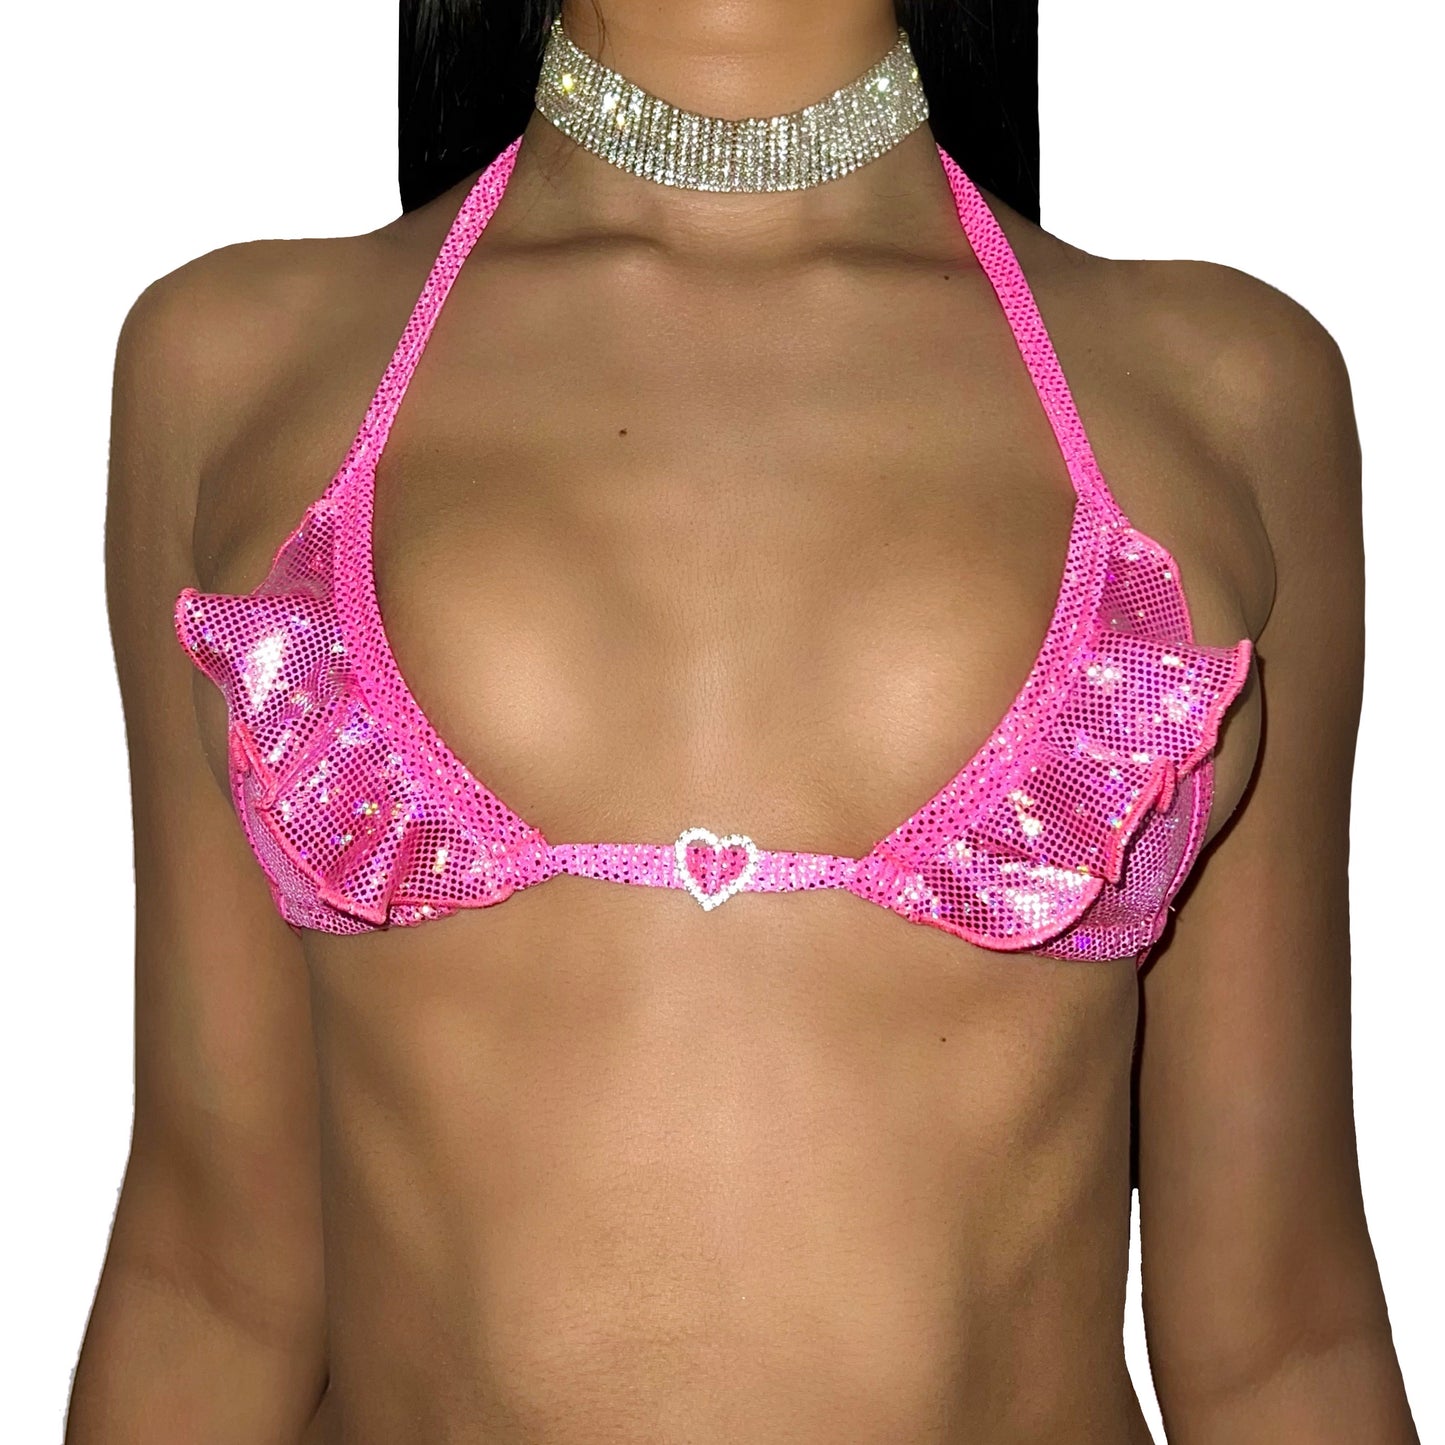 ACE Adore Tri Top: Halo Candy Pink